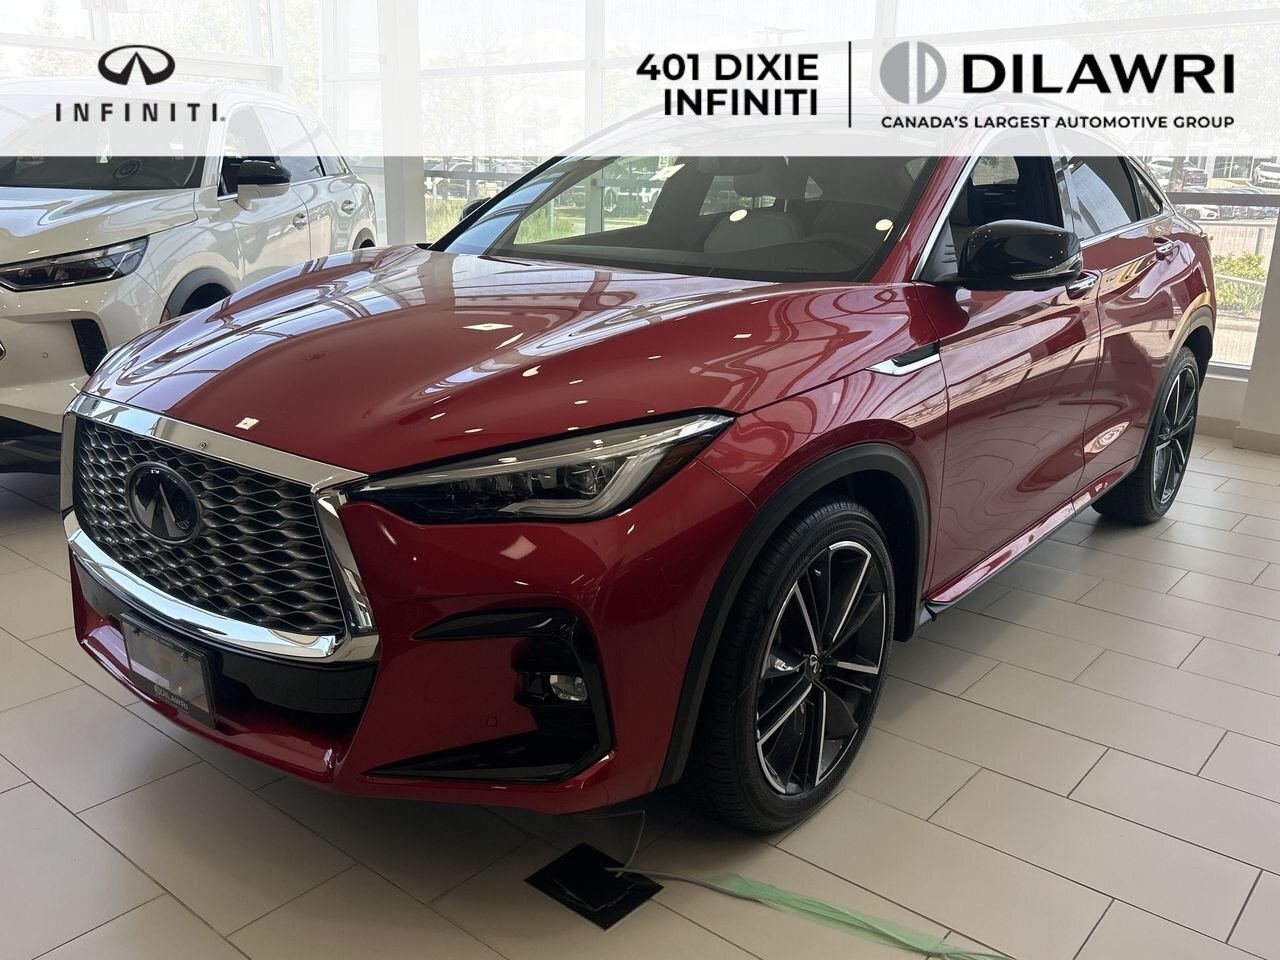 2023 Infiniti QX55 Essential Rates as low as 1.99%